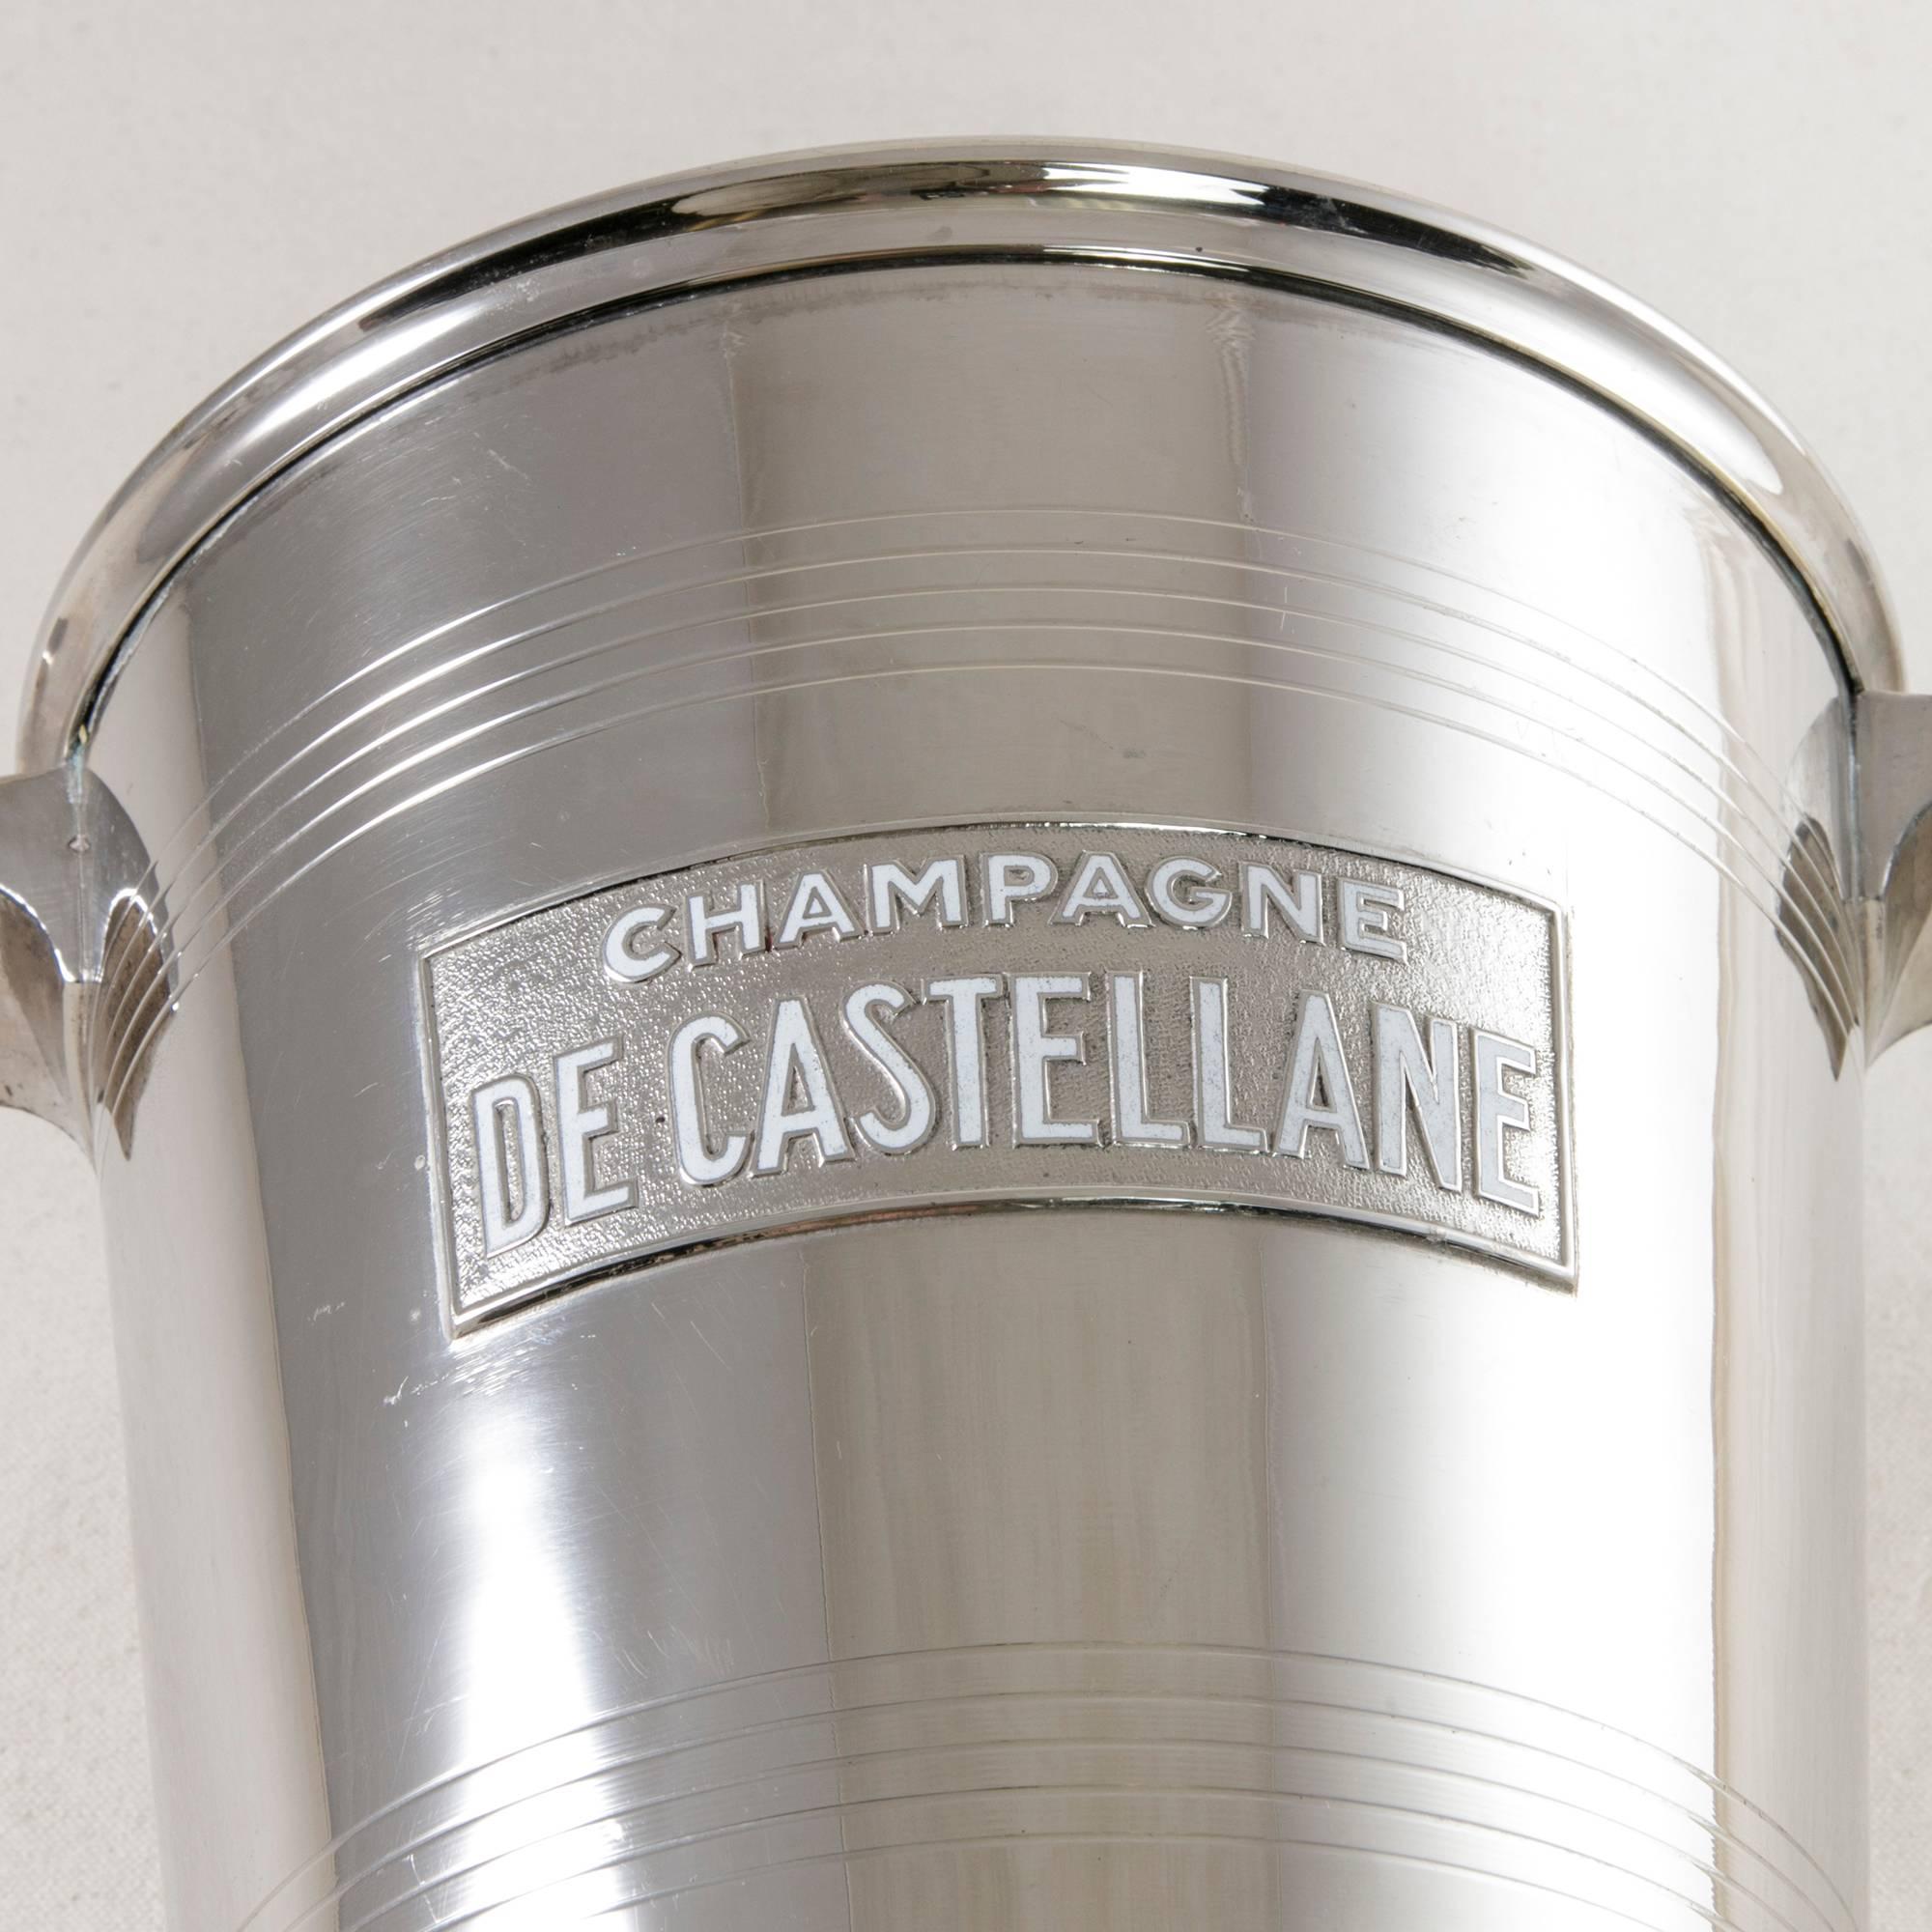 This Art Deco period silver plate champagne bucket features the name de Castellane in white enameled letters. De Castellane is a champagne producer dating back to the year 1895 when it was founded in the city of Epernay, the champagne capital of